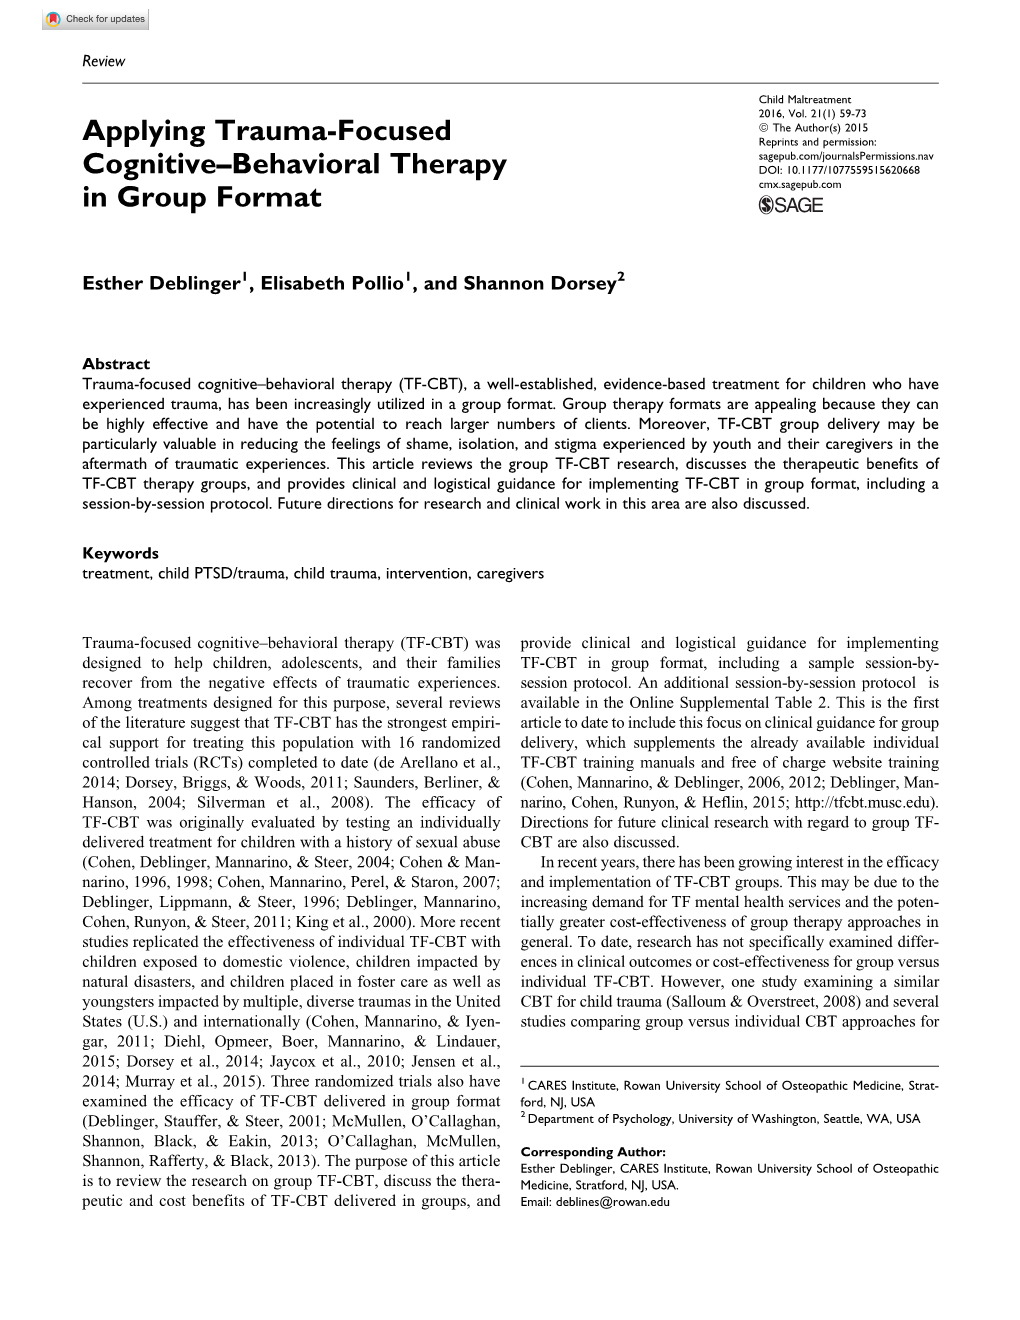 Applying Trauma-Focused Cognitive–Behavioral Therapy in Group Format